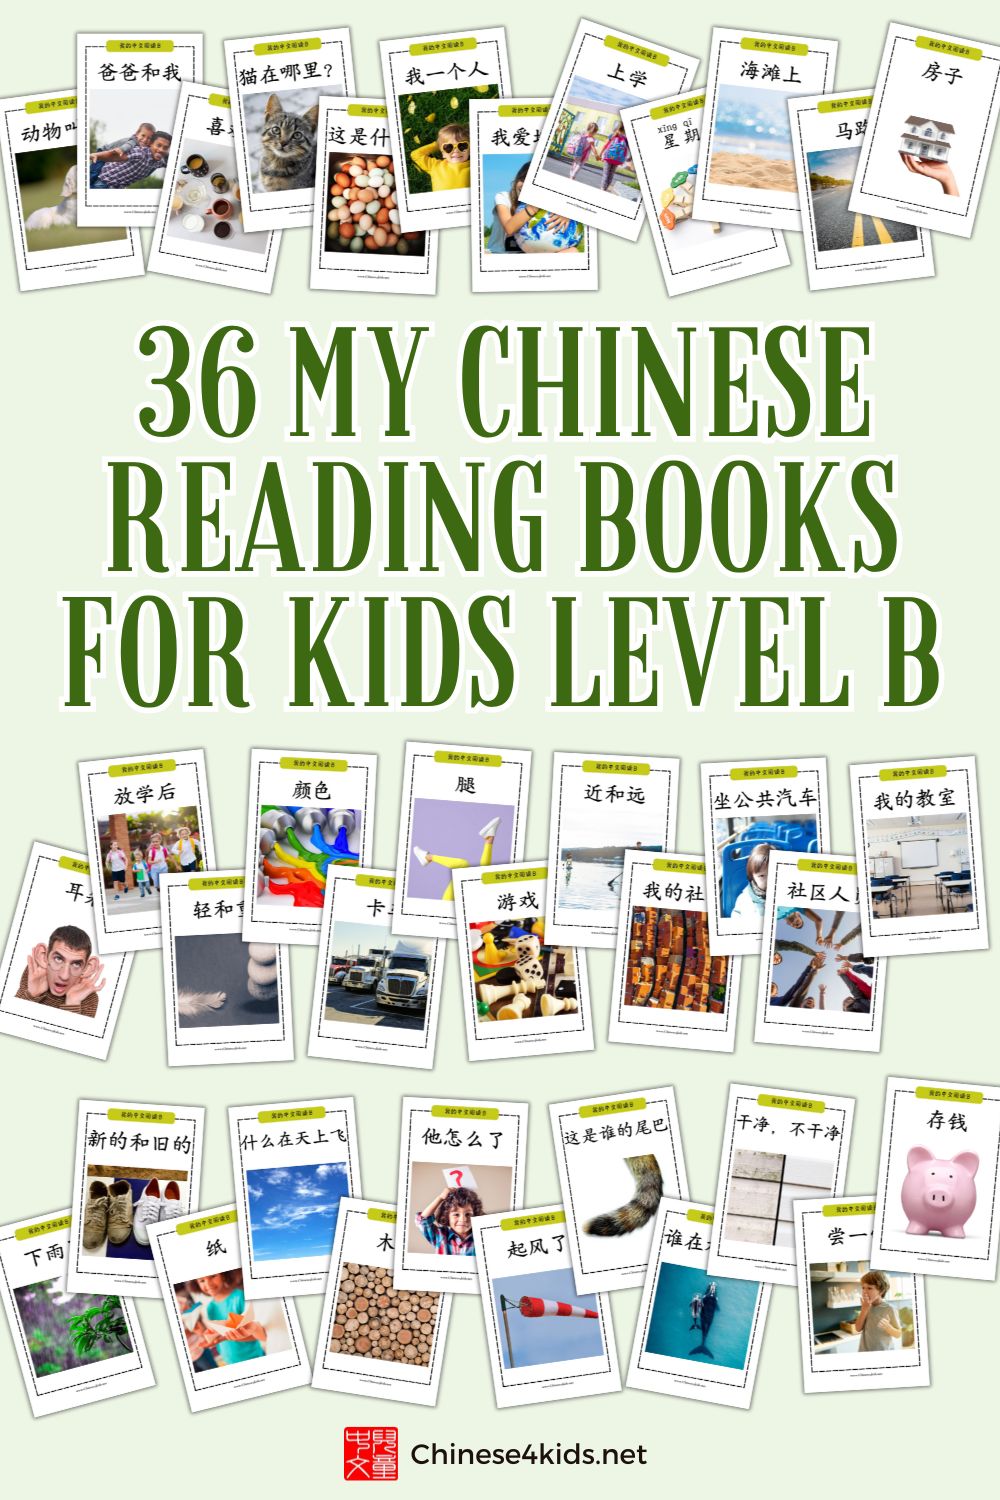 These 36 My Chinese Reading Level B books are fantastic for kids to continue reading Chinese books and improve their Chinese literacy as an additional language.